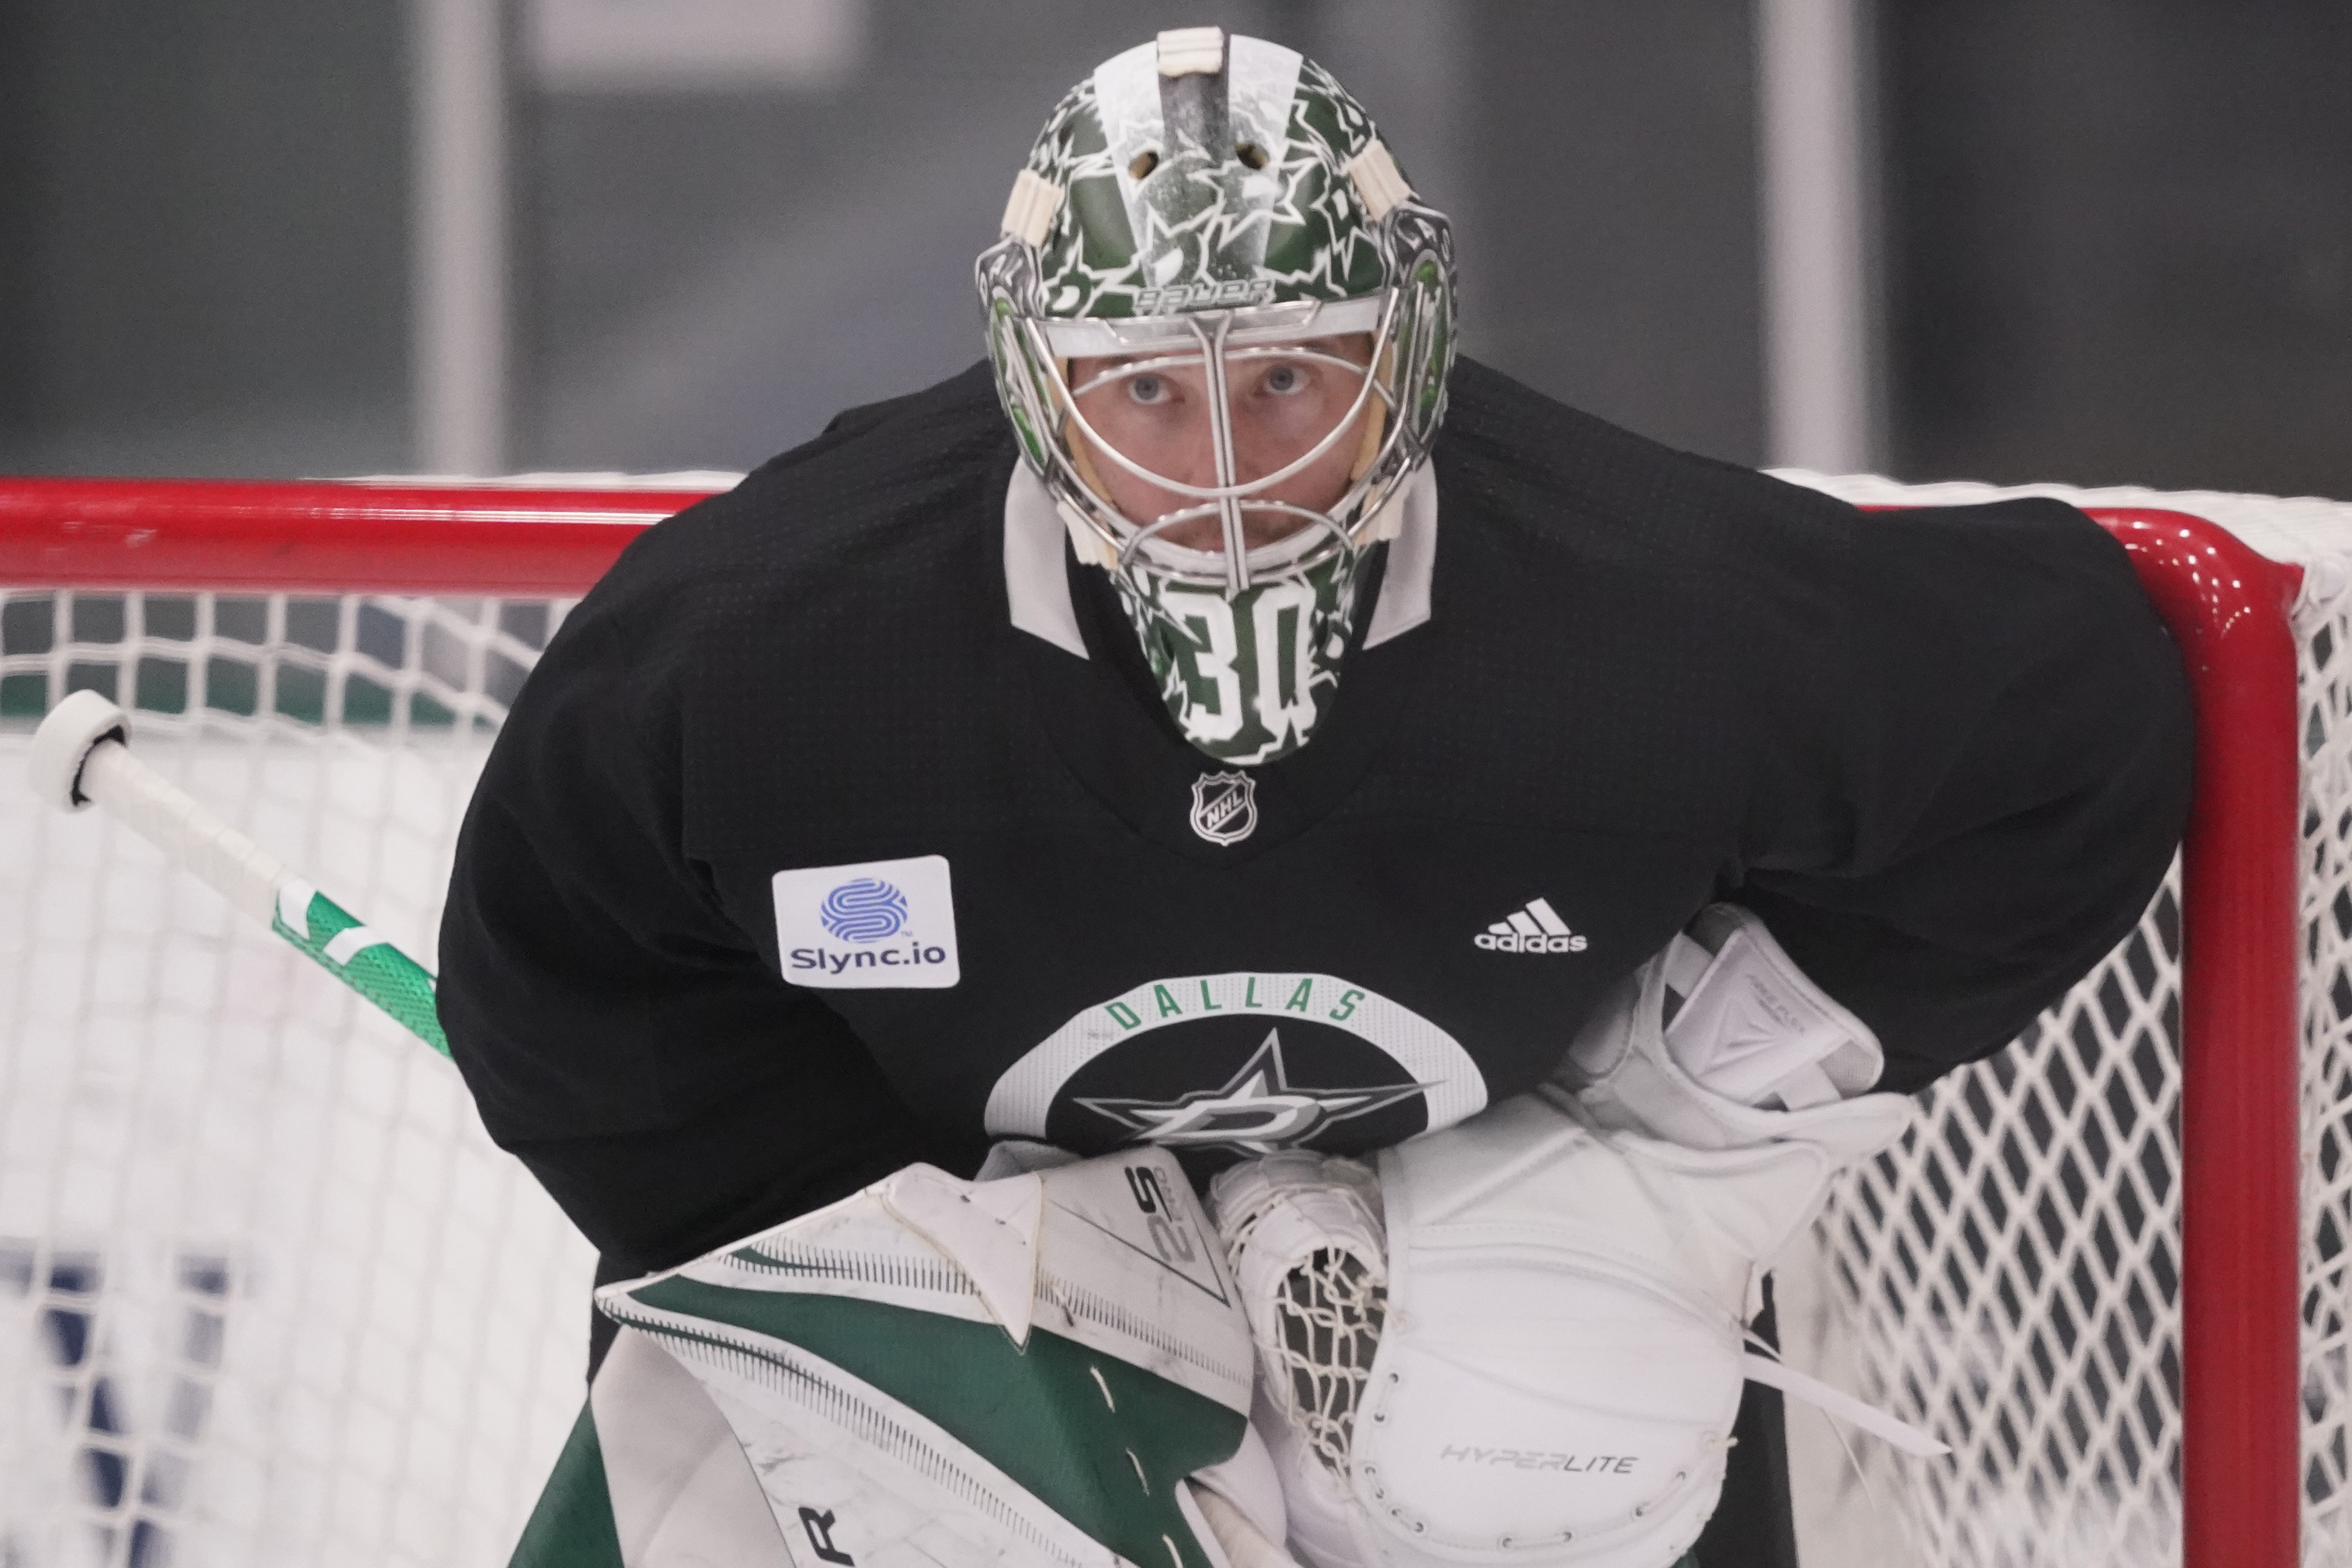 Why the Stars waived Anton Khudobin, and what comes next for Dallas